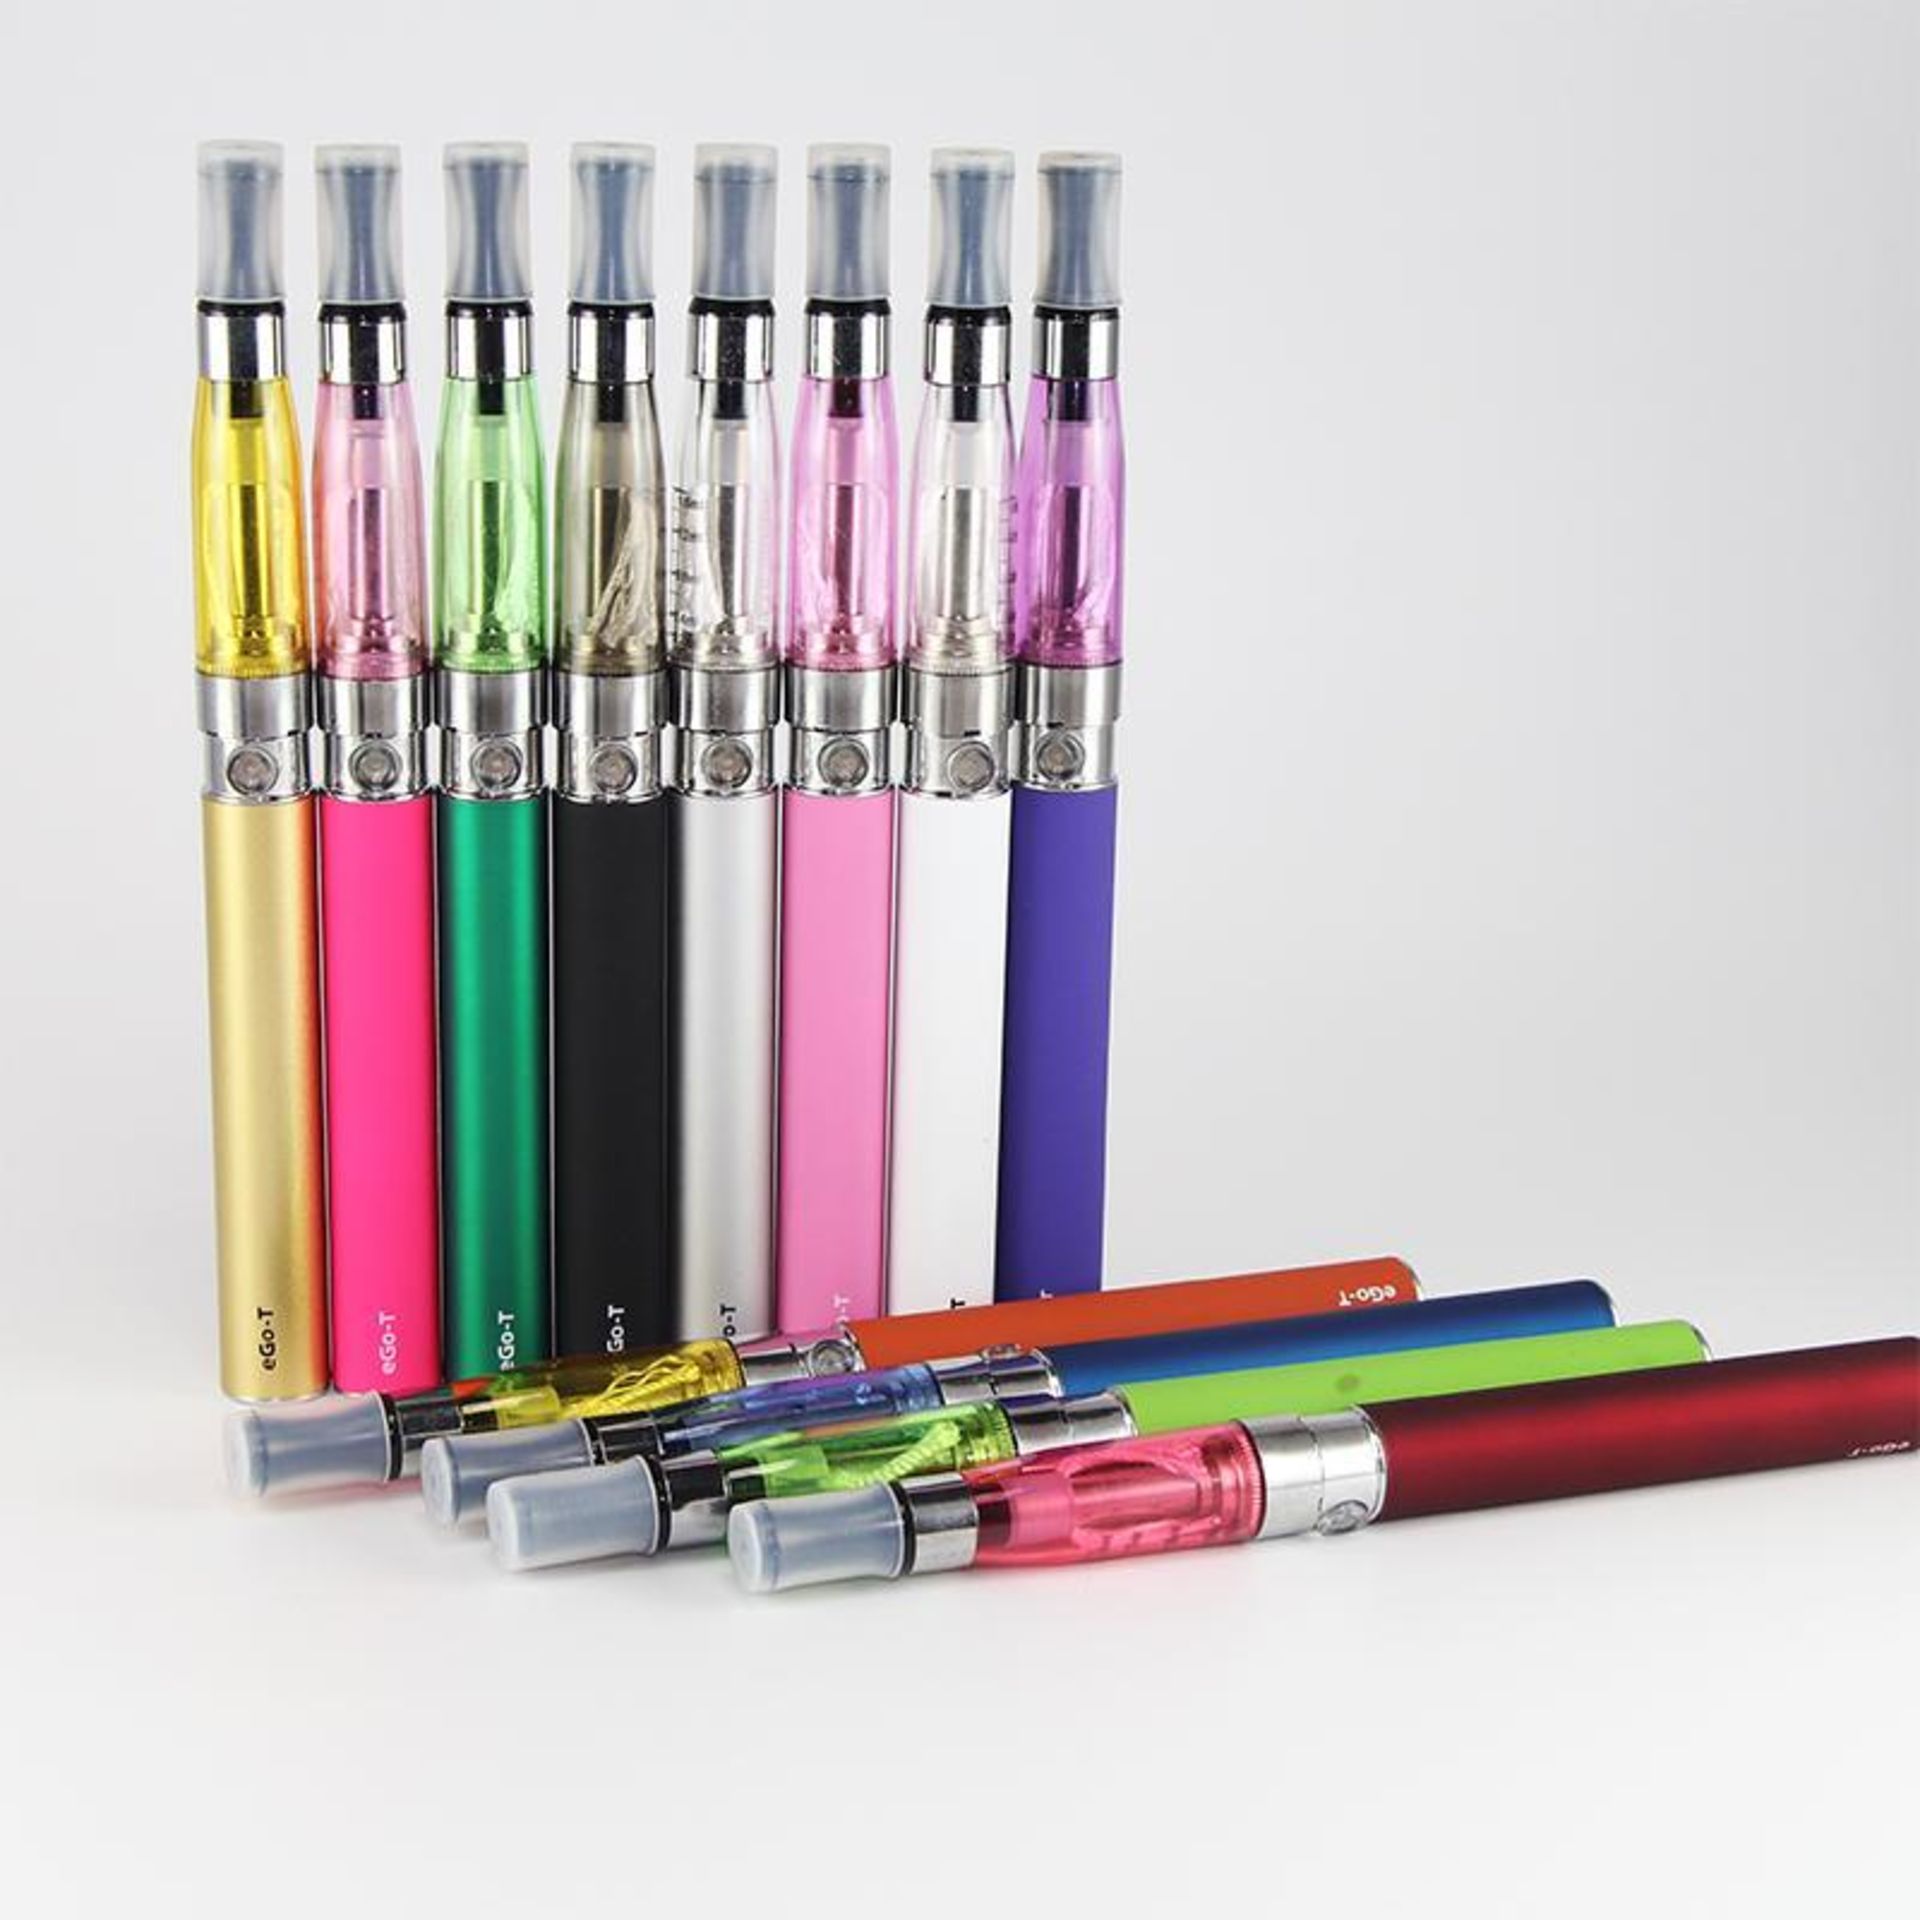 Grade A Refillable Electronic Cigarette Kit With Battery And USB Charger (Colours May Vary)